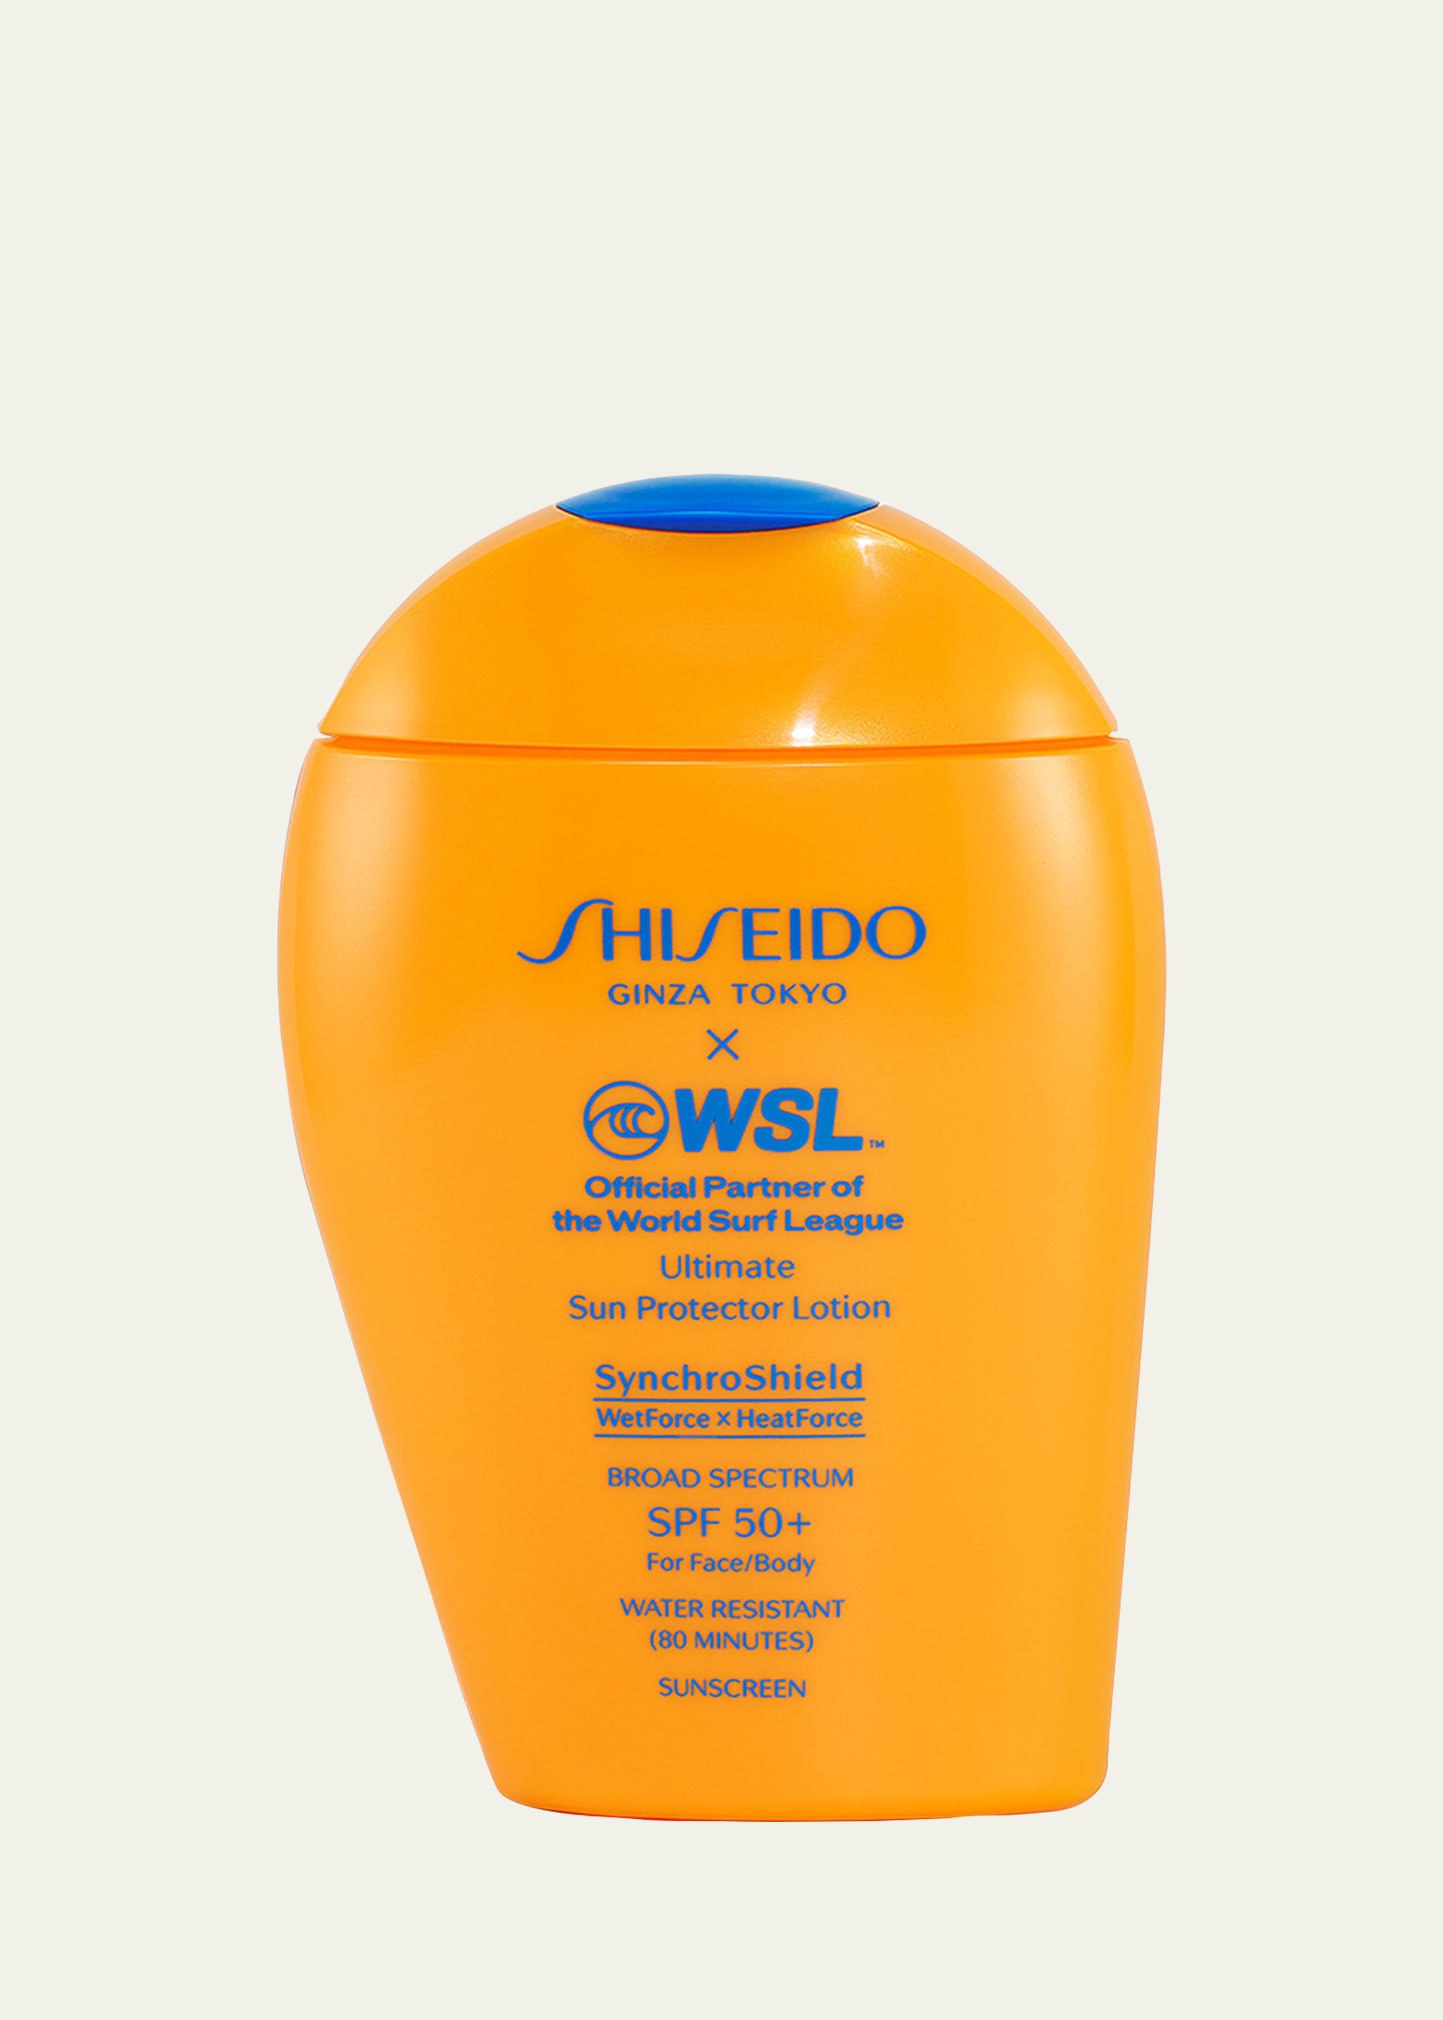 Shiseido Limited-edition World Surf League Ultimate Sun Protector Lotion Spf 50+, 5 Oz. In White